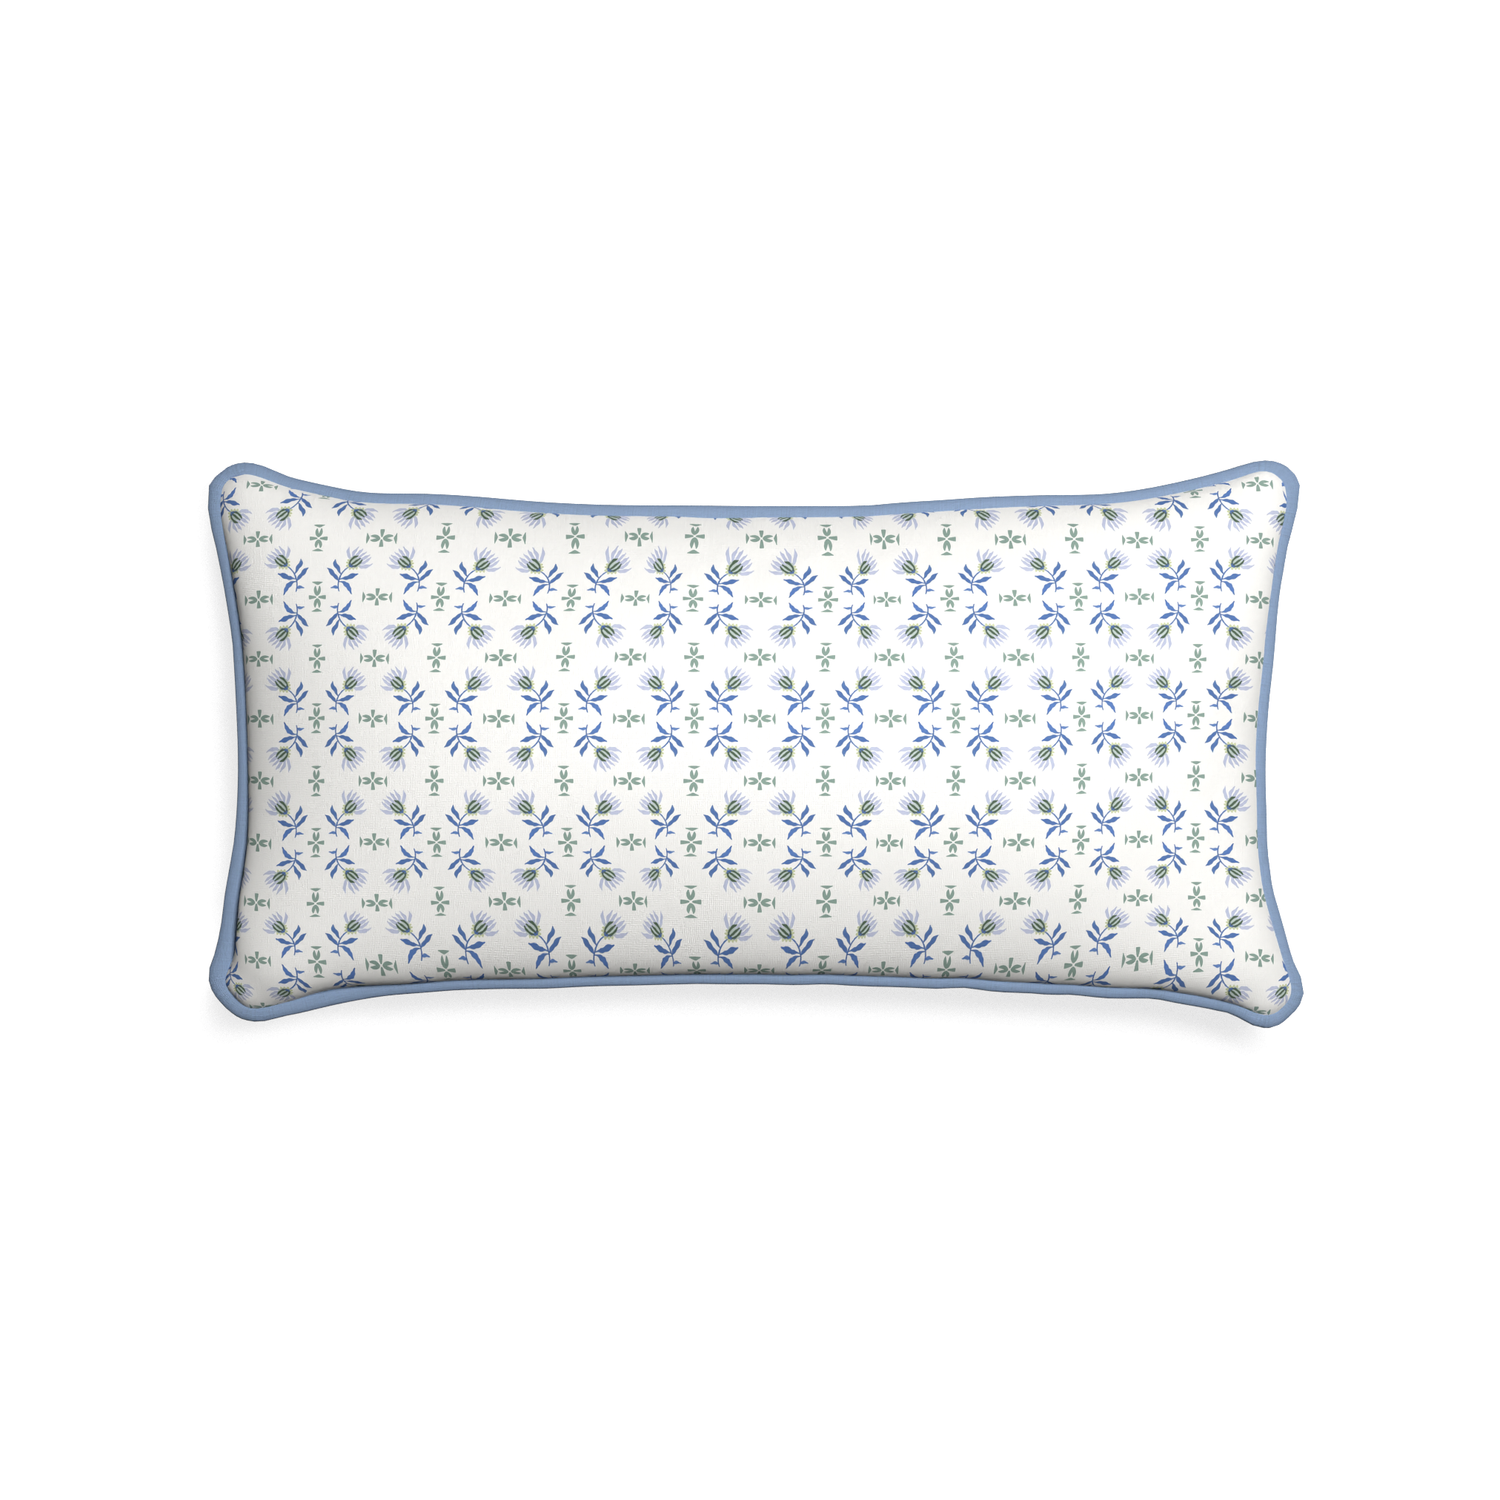 Midi-lumbar lee custom blue & green floralpillow with sky piping on white background